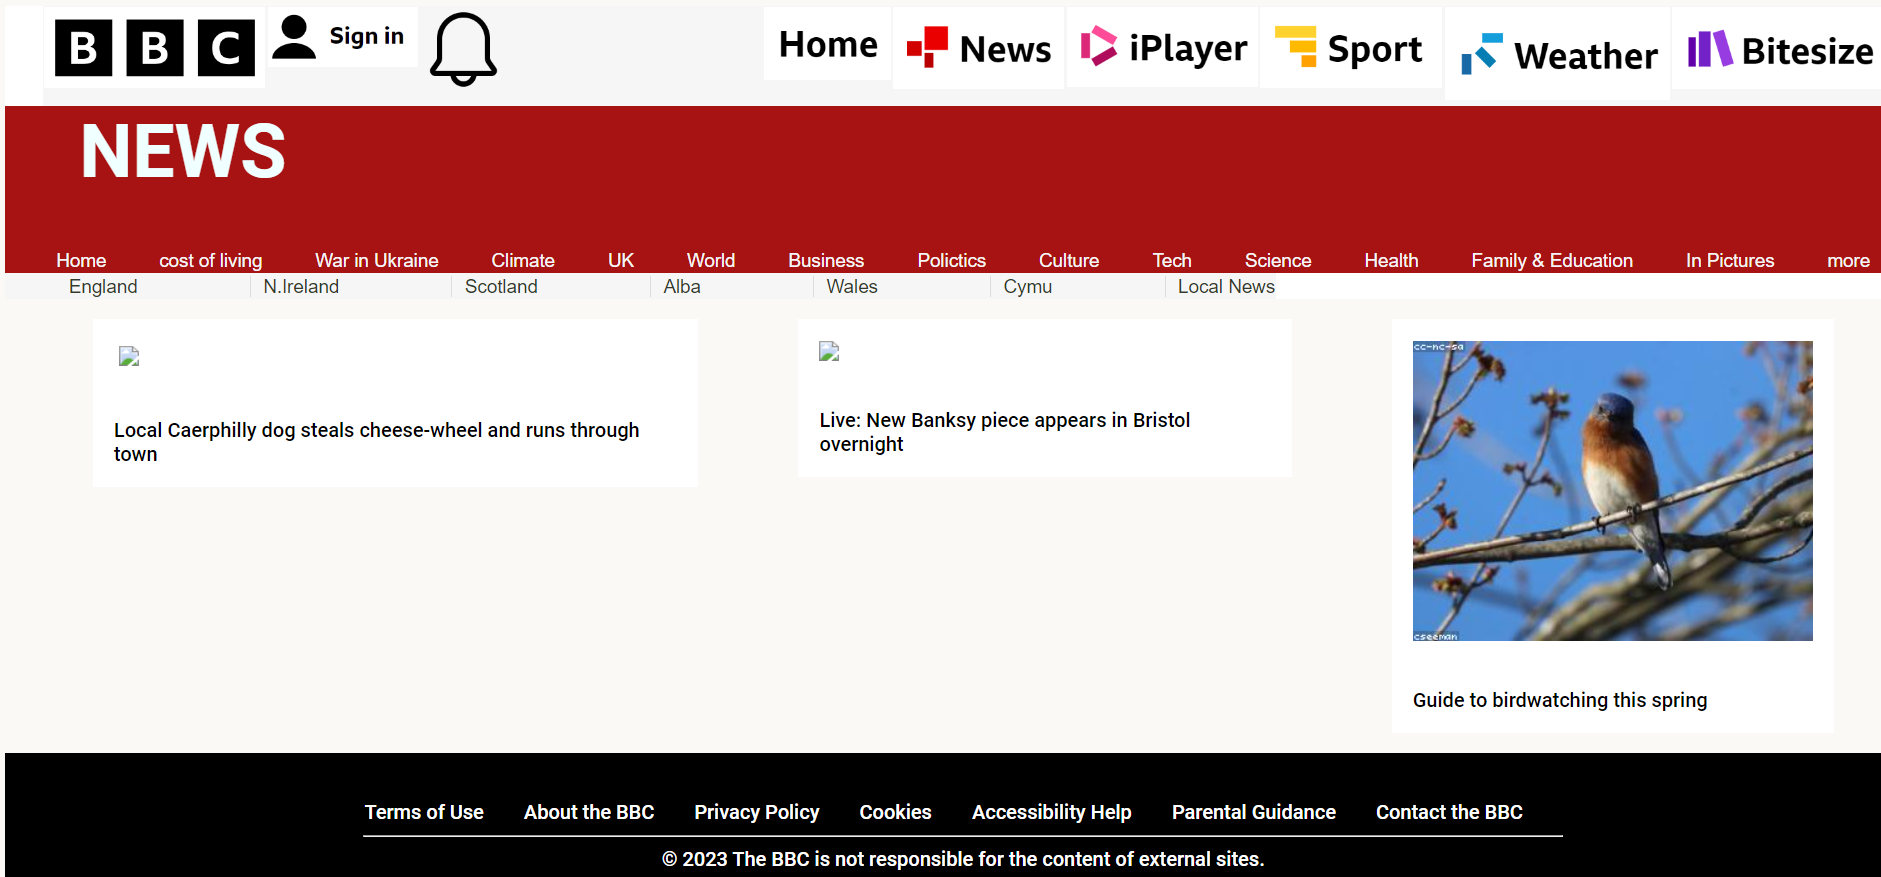 An image displaying a website designed to look like the BBC News site.